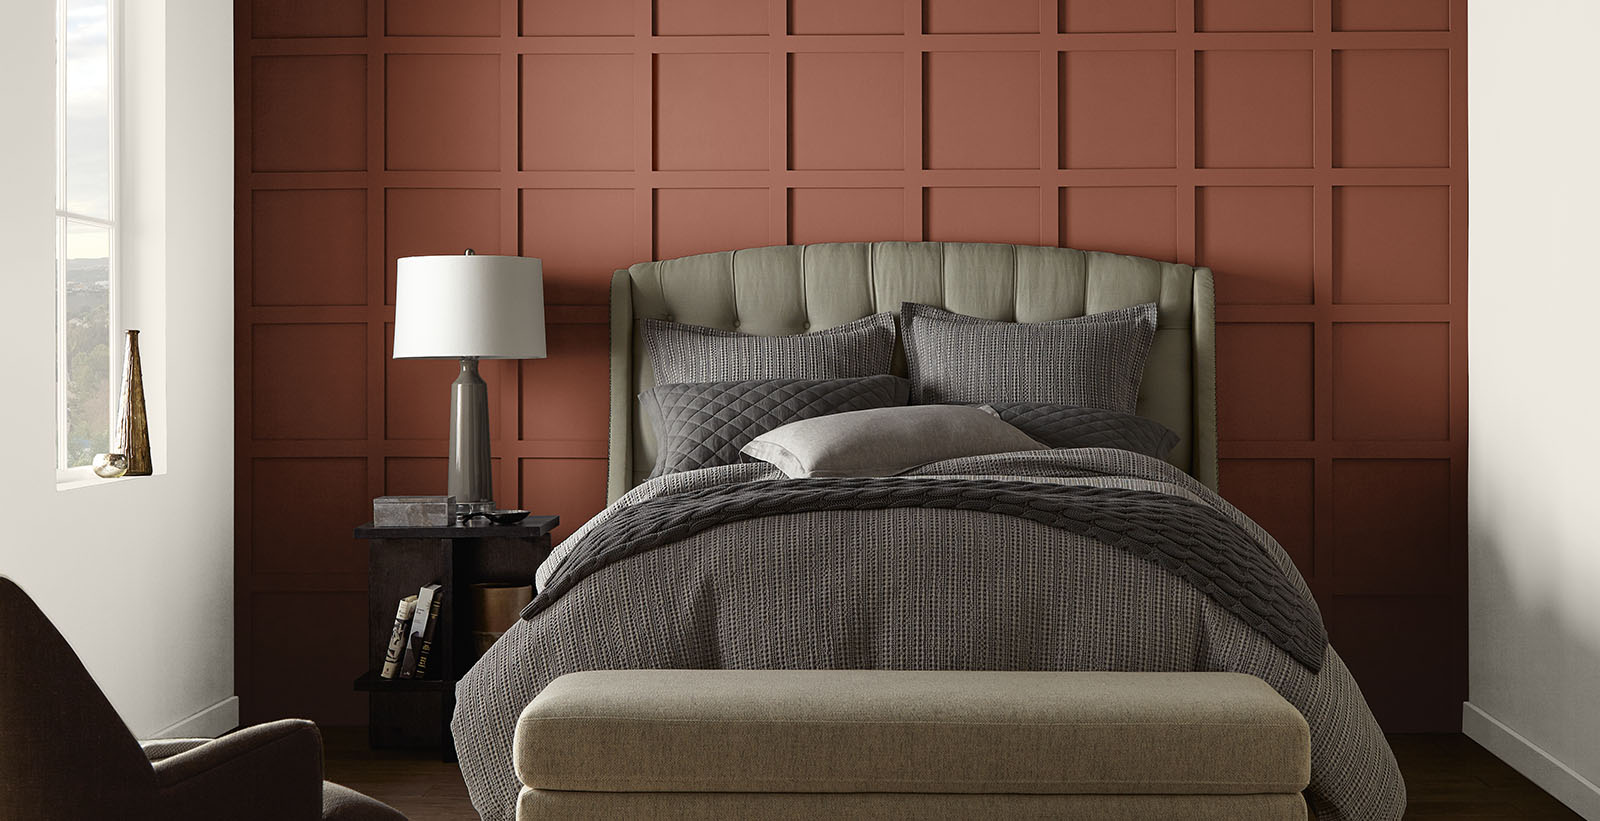 the best paint colors for a restful sleep bedroom cozy classic orange burnt sienna walls